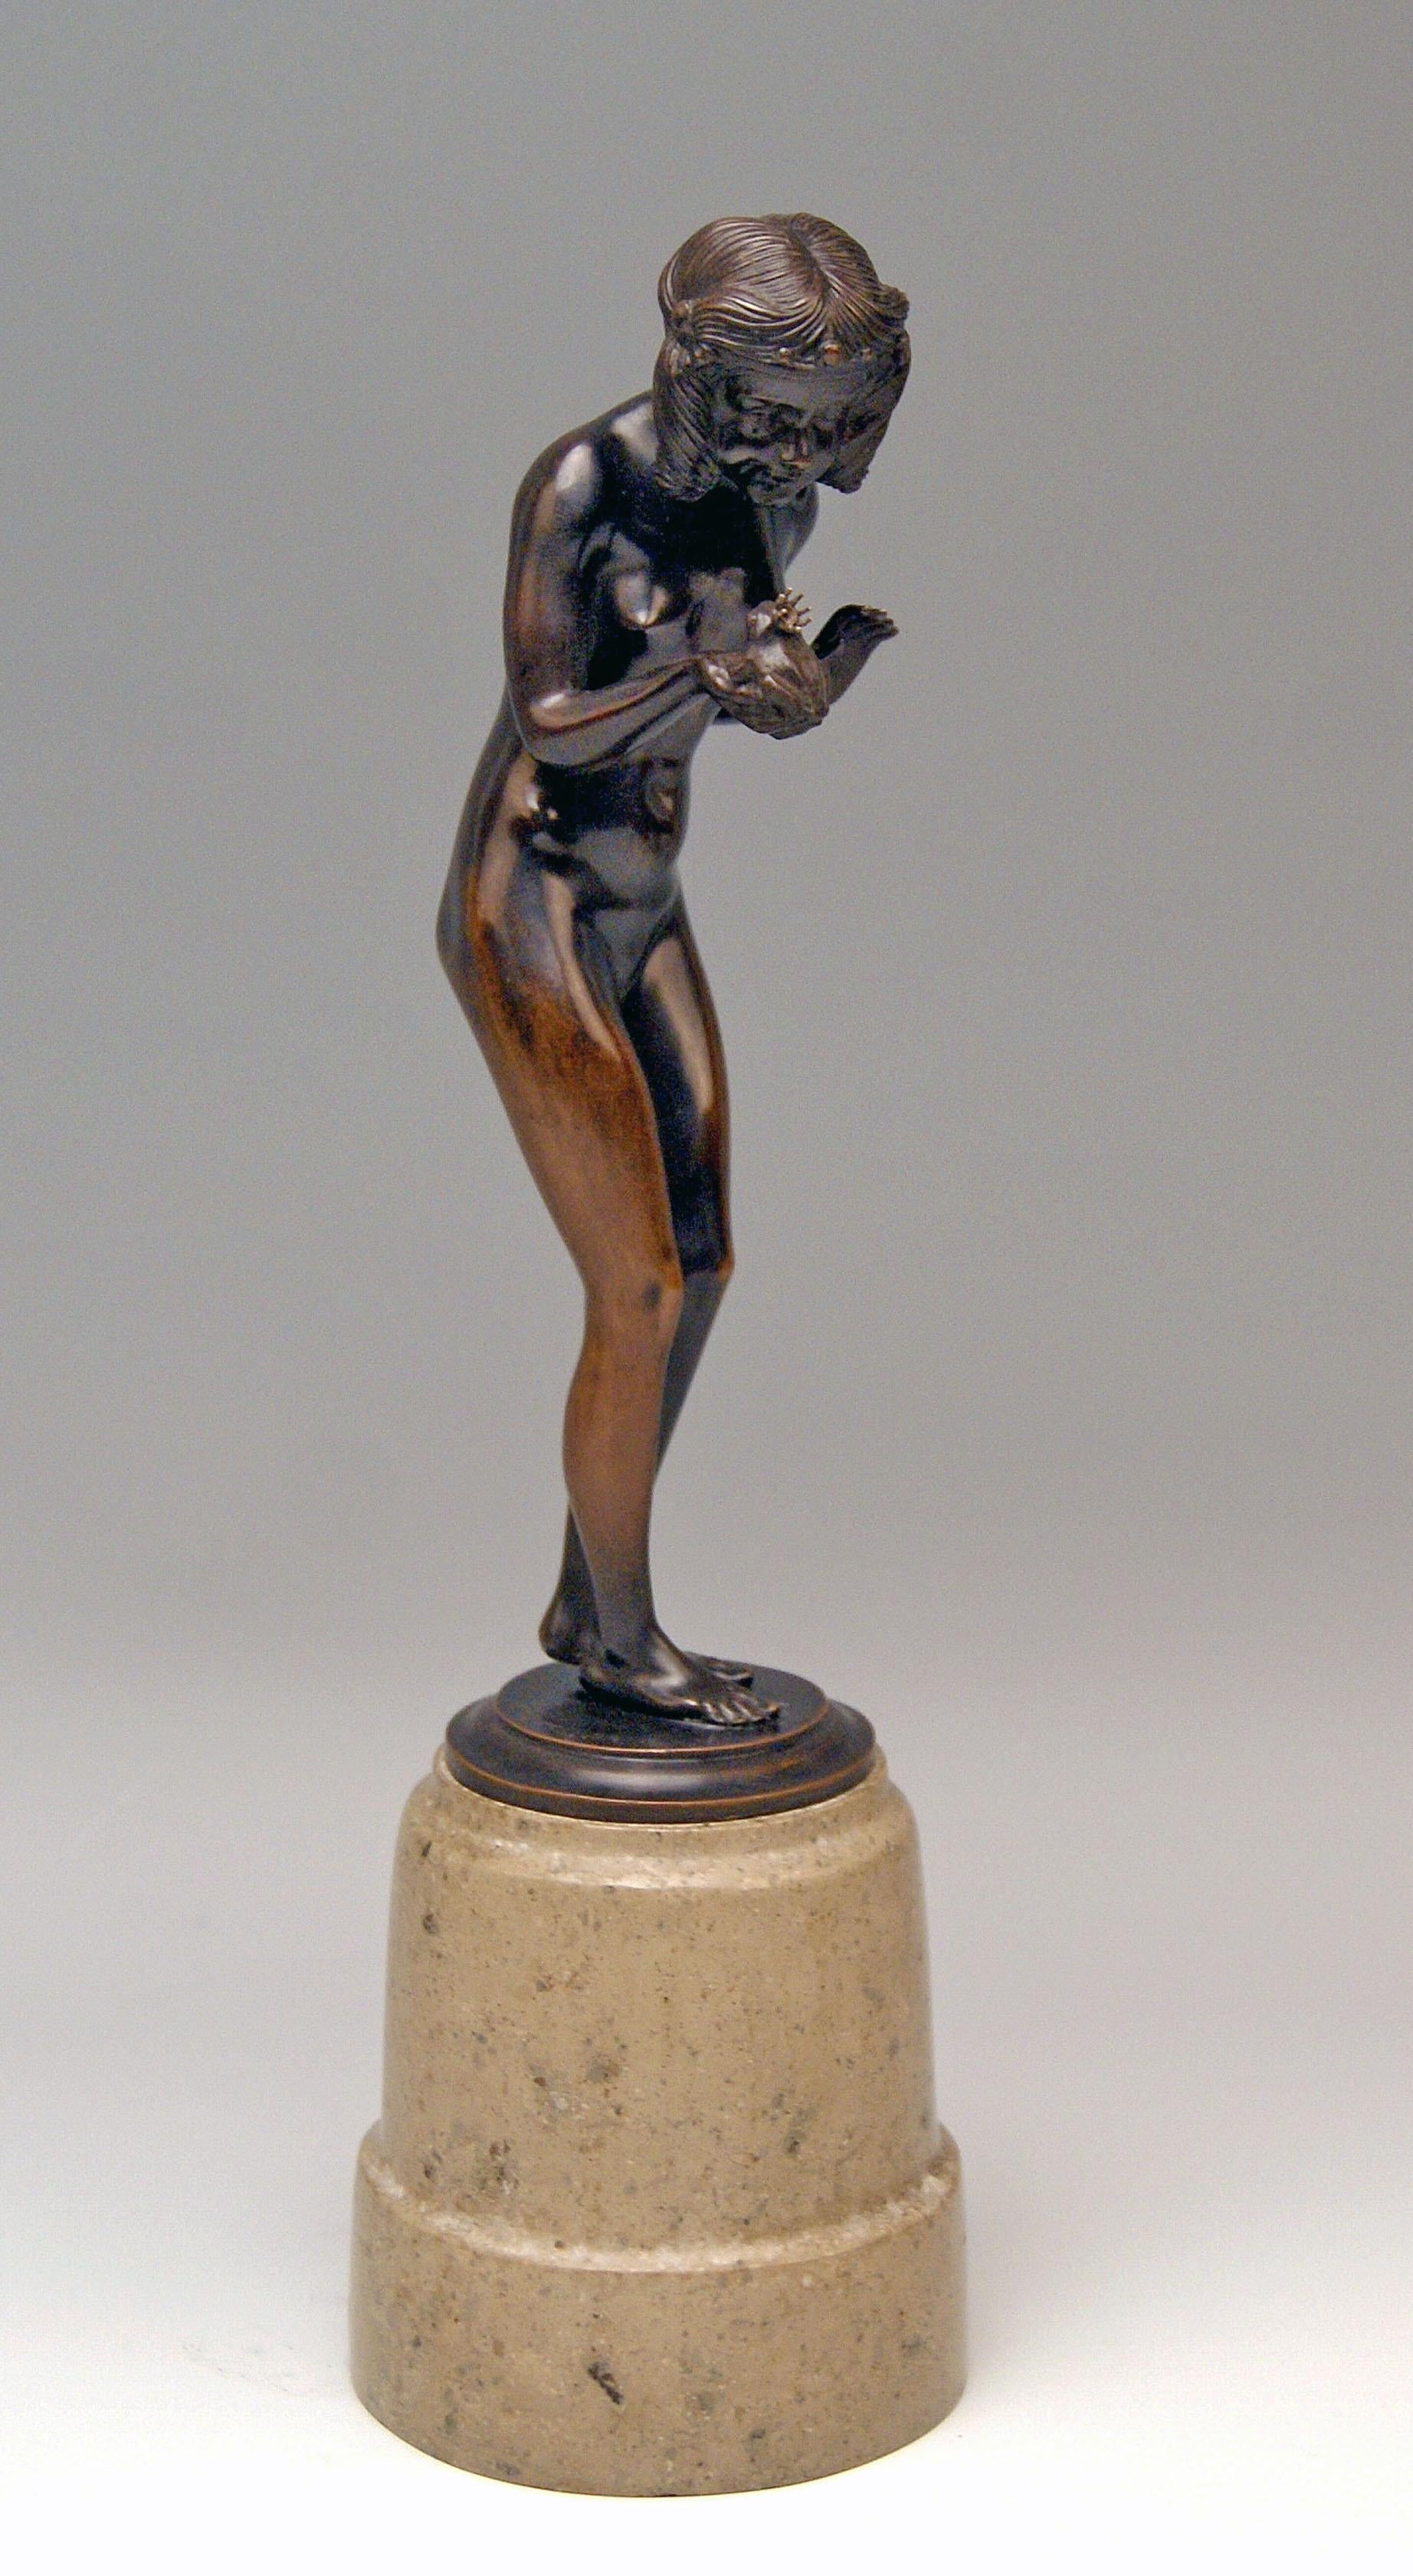 Interesting Bronze Figurine: Lady nude with frog prince
 
It is a lovely German Bronze item: The nude lady stands on round flat bronze base which is attached to marble column. The woman having bent her upper body sligthly forwards holds a small